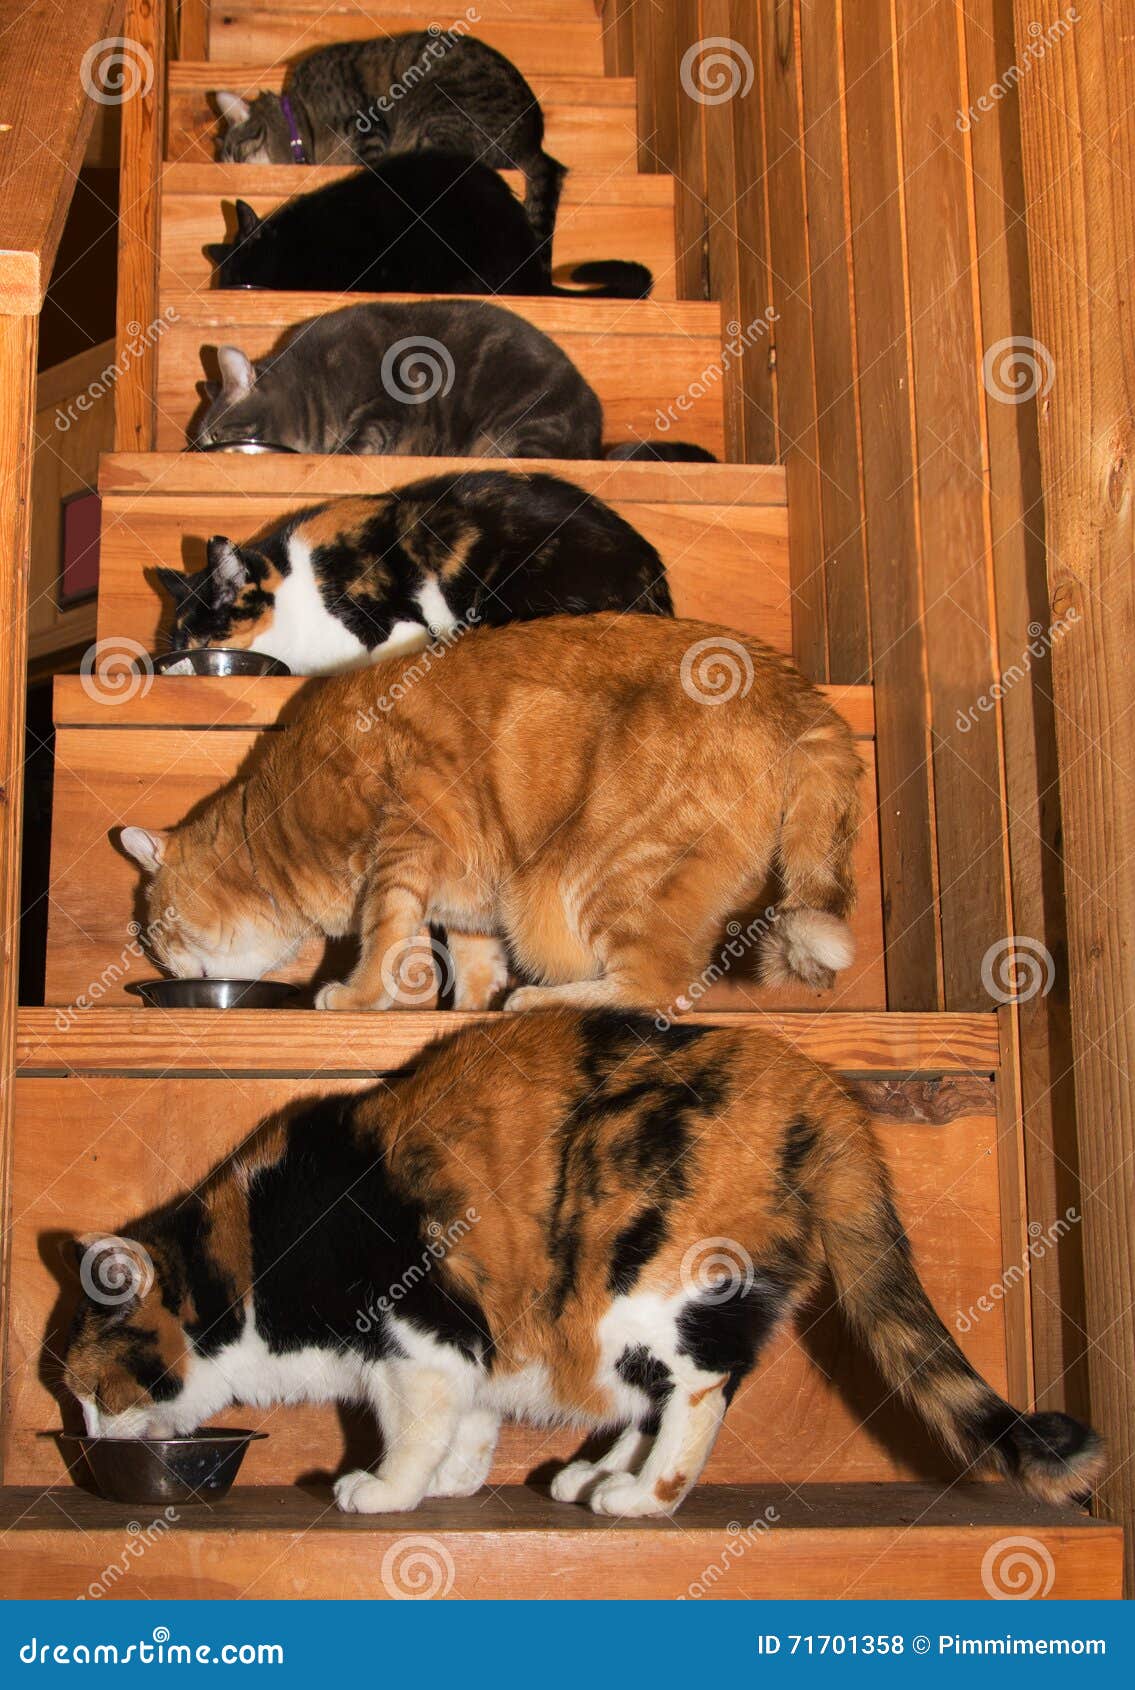 27 Six Cats High Res Illustrations - Getty Images